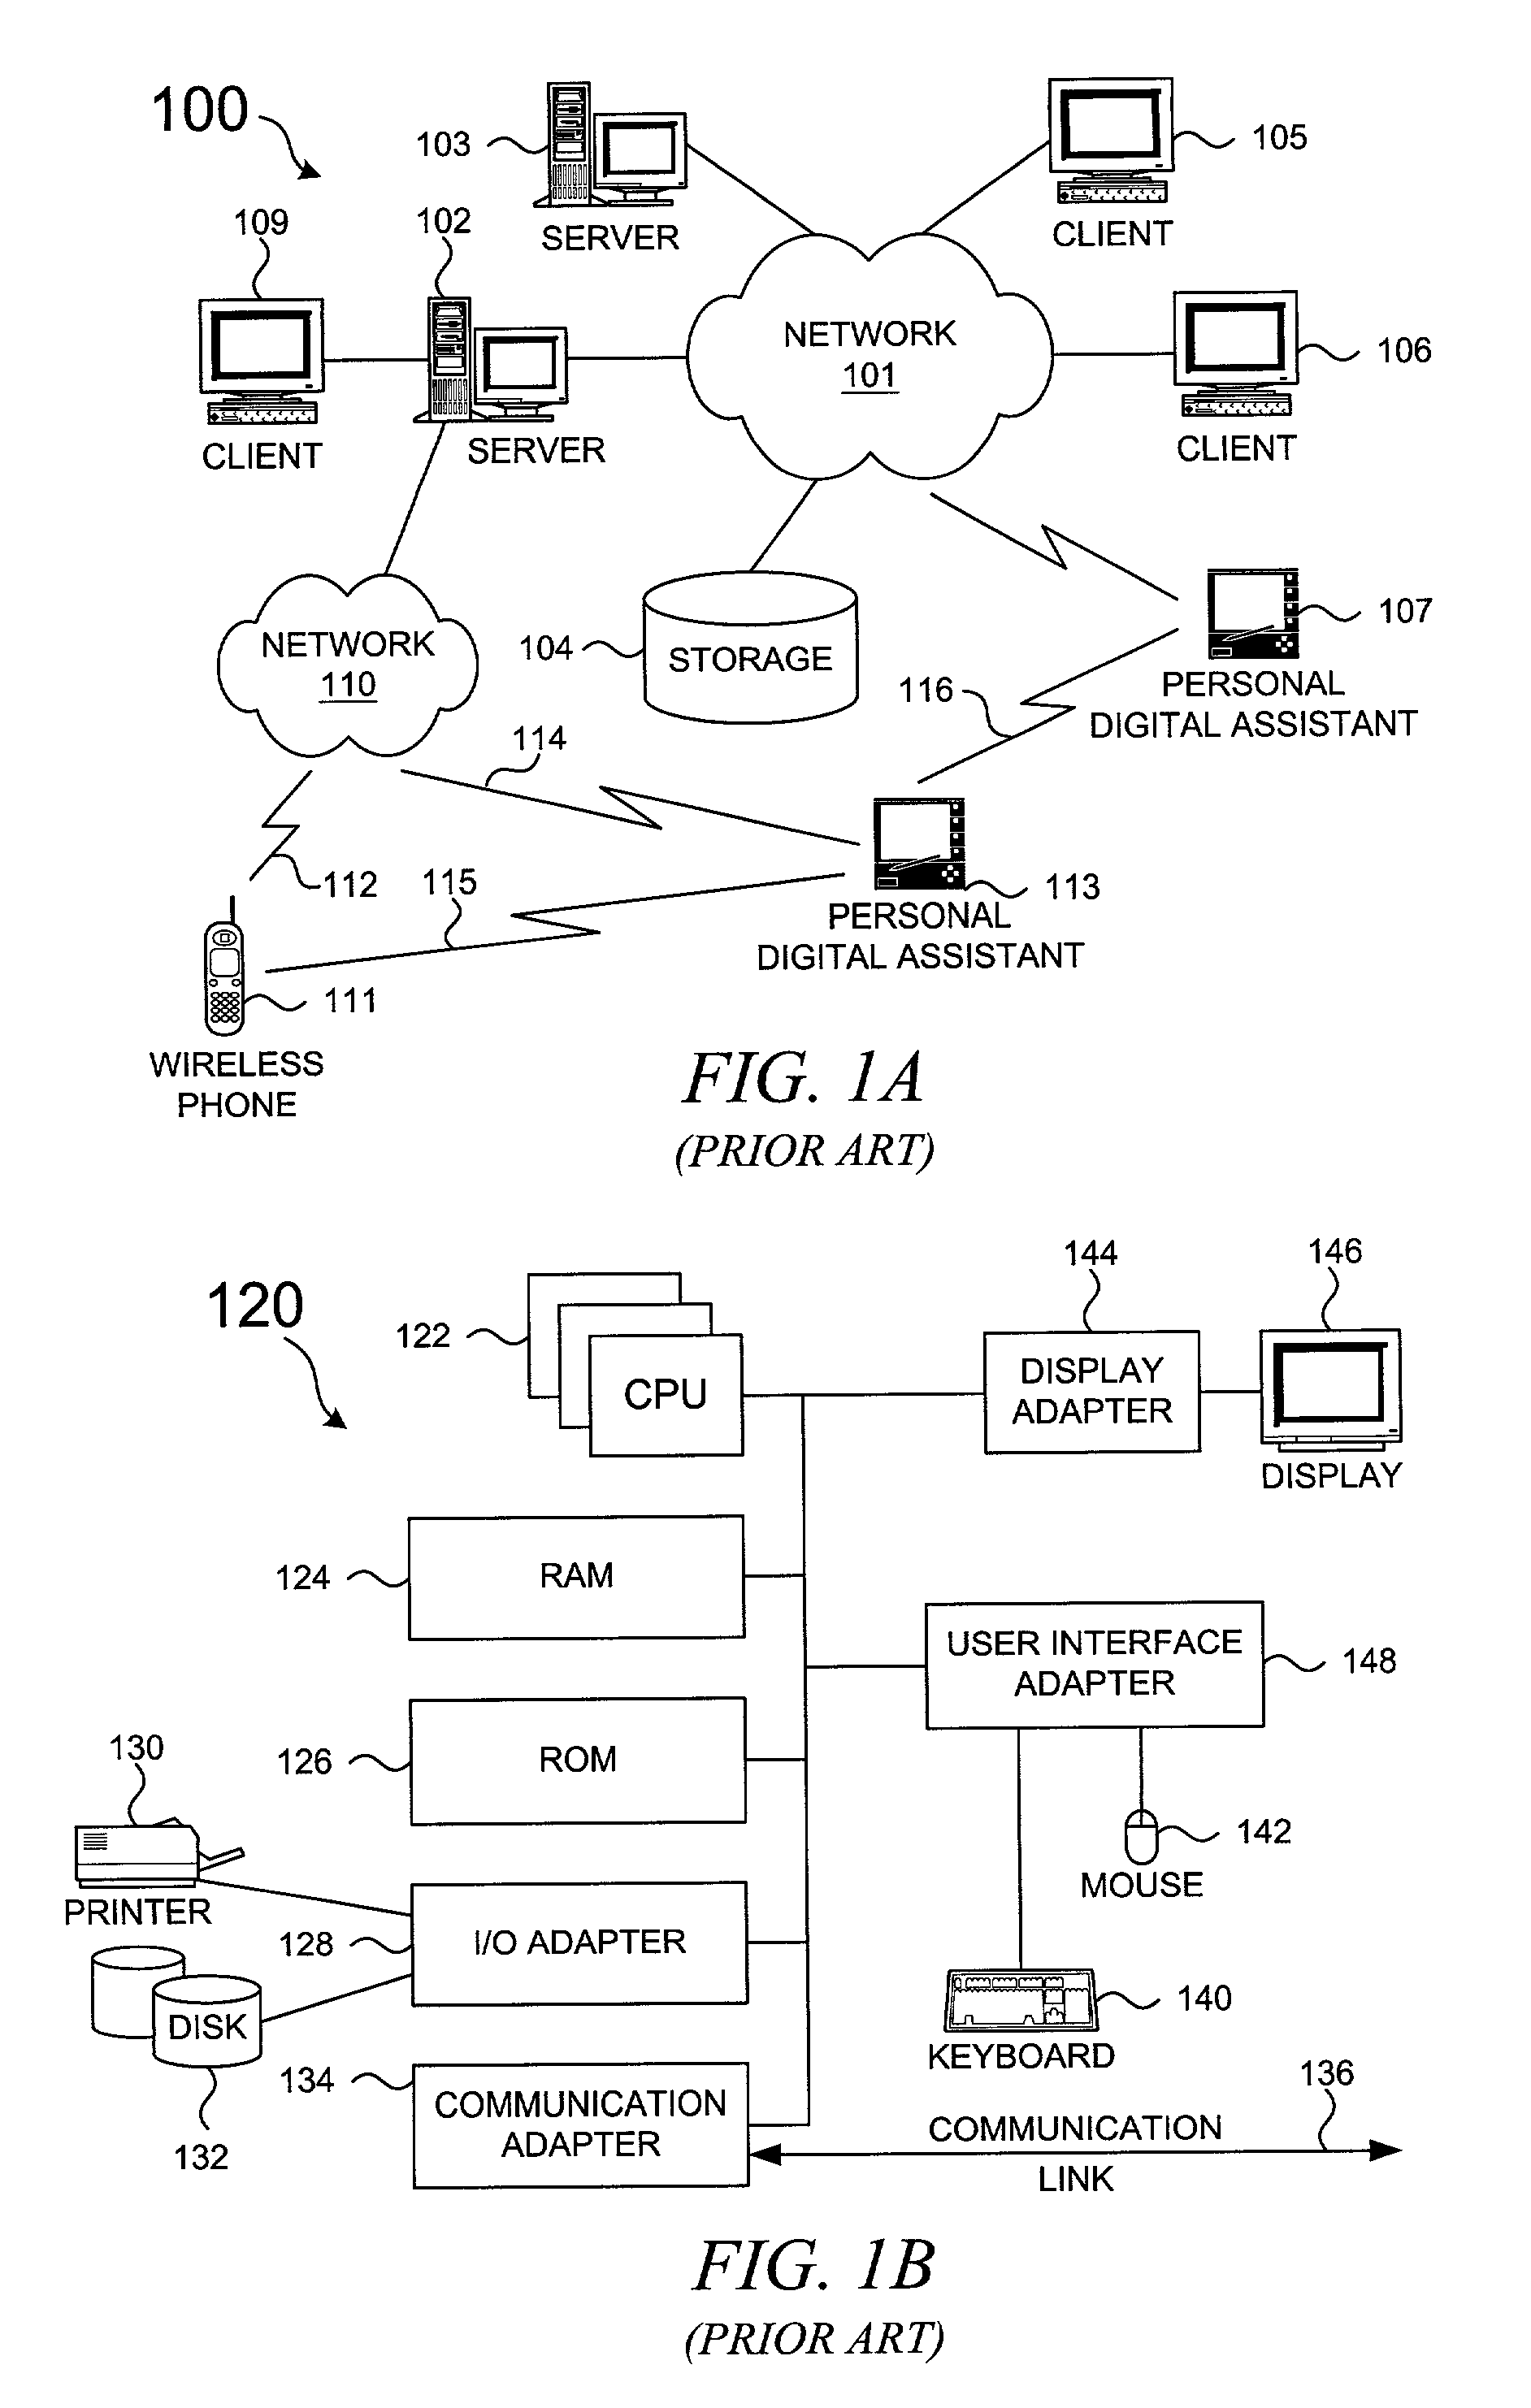 Method and system for reducing synchronization waits when allocating sequenced identifiers in a multi-threaded server